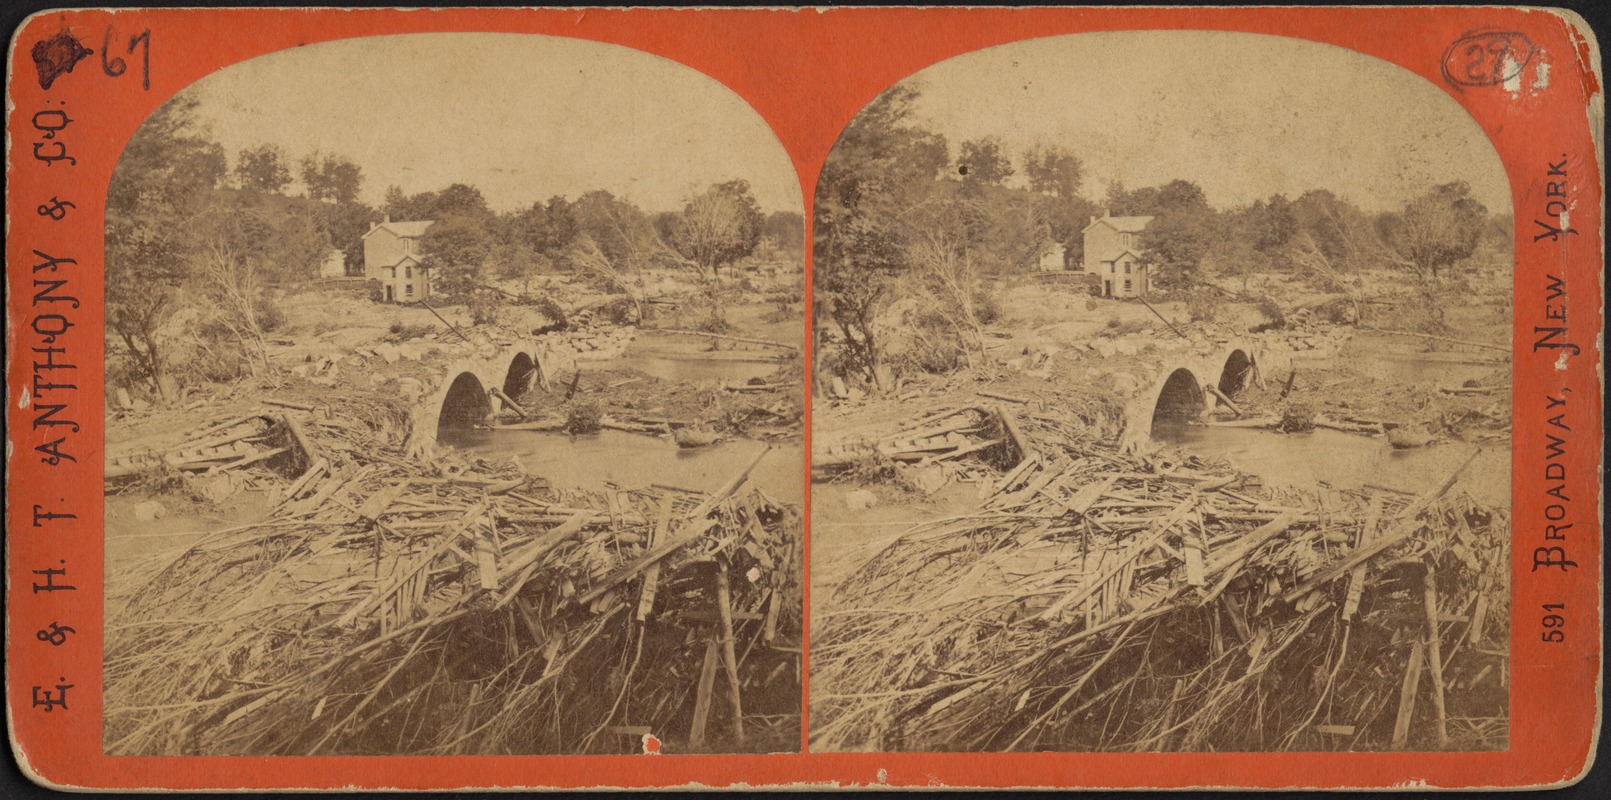 Mill River flood, Hampshire County, Mass., May 16, 1874